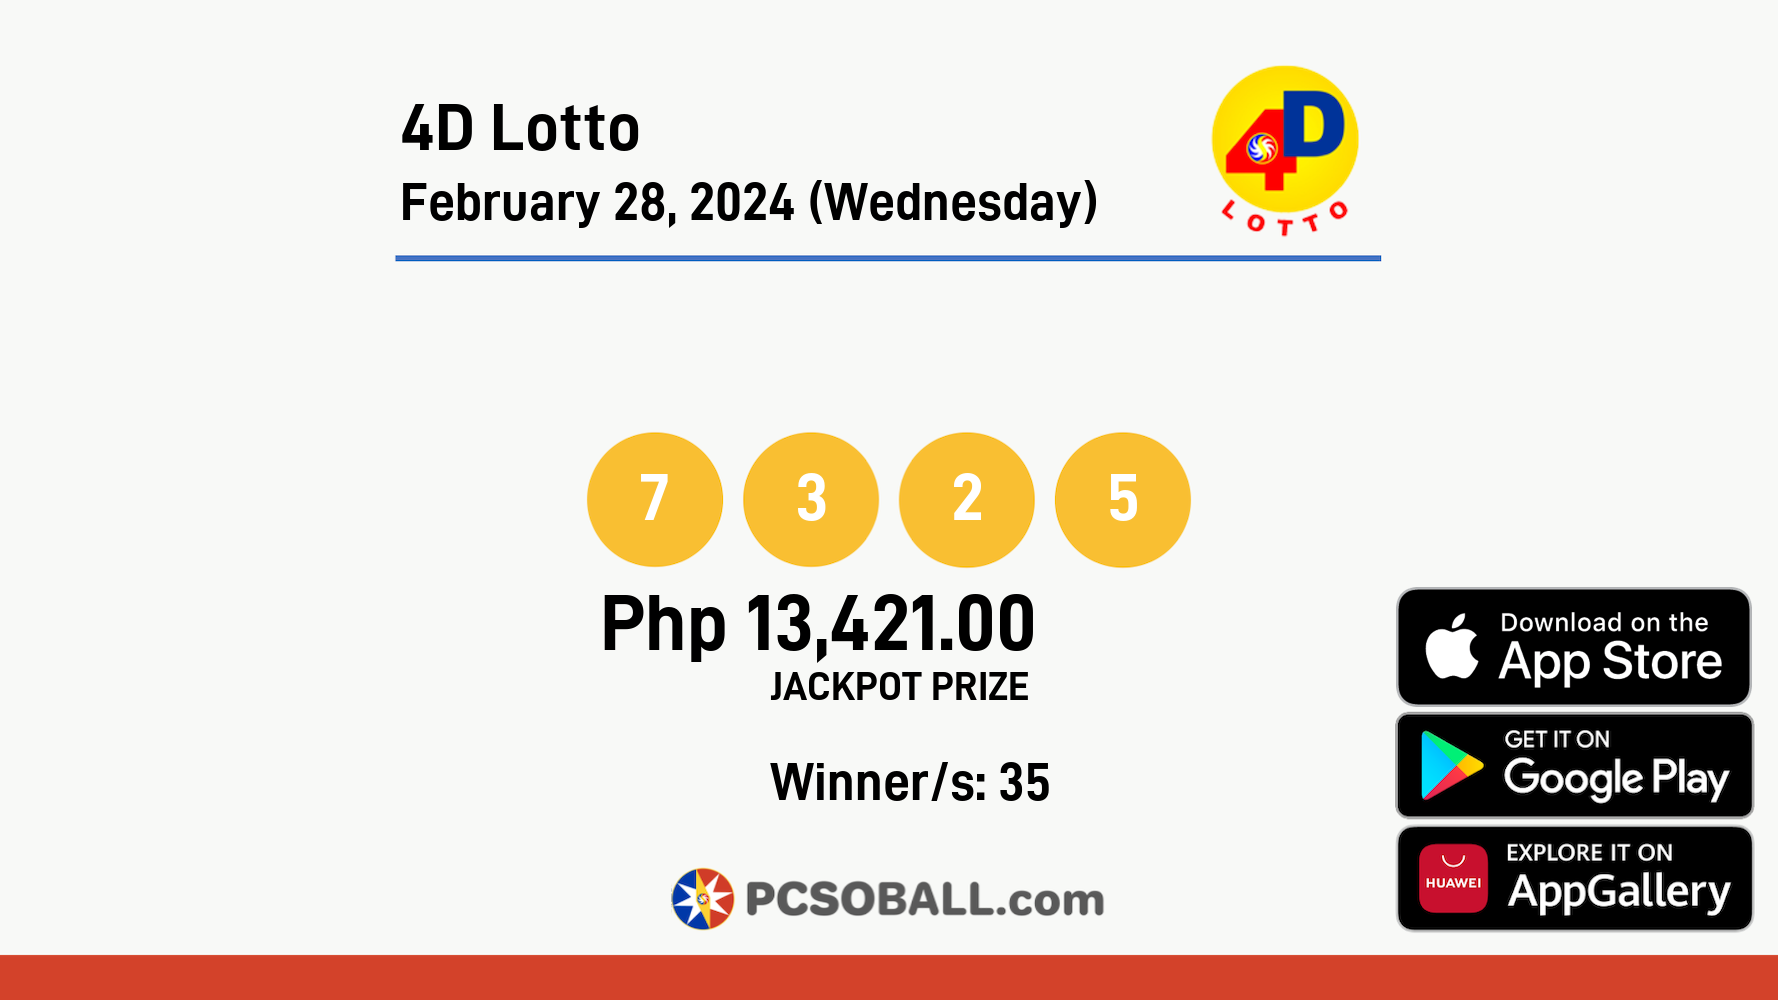 4D Lotto February 28, 2024 (Wednesday) Result